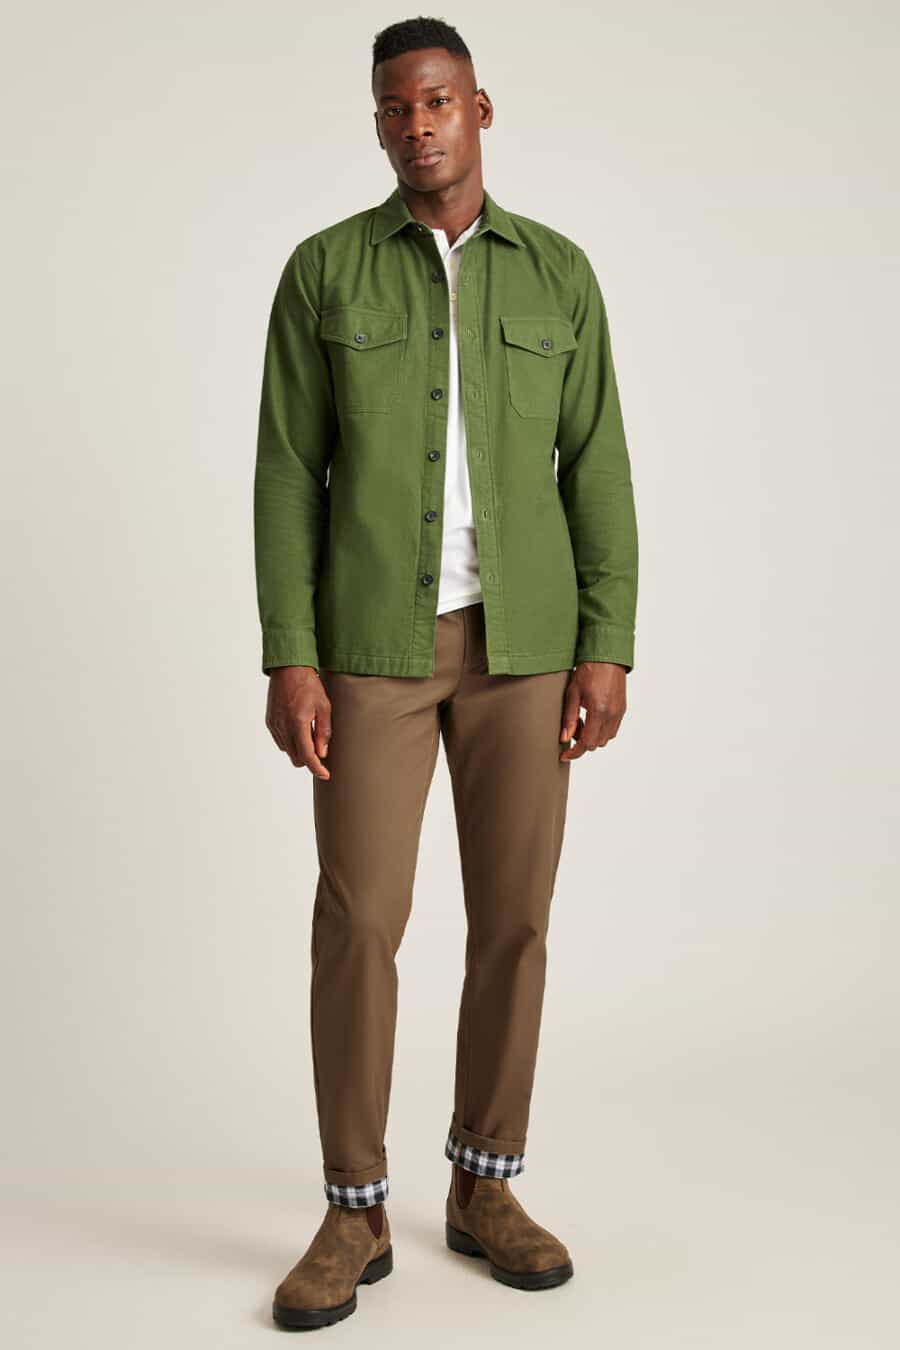 Men's brown pants, white T-shirt, green canvas overshirt and suede brown Chelsea boots outfit